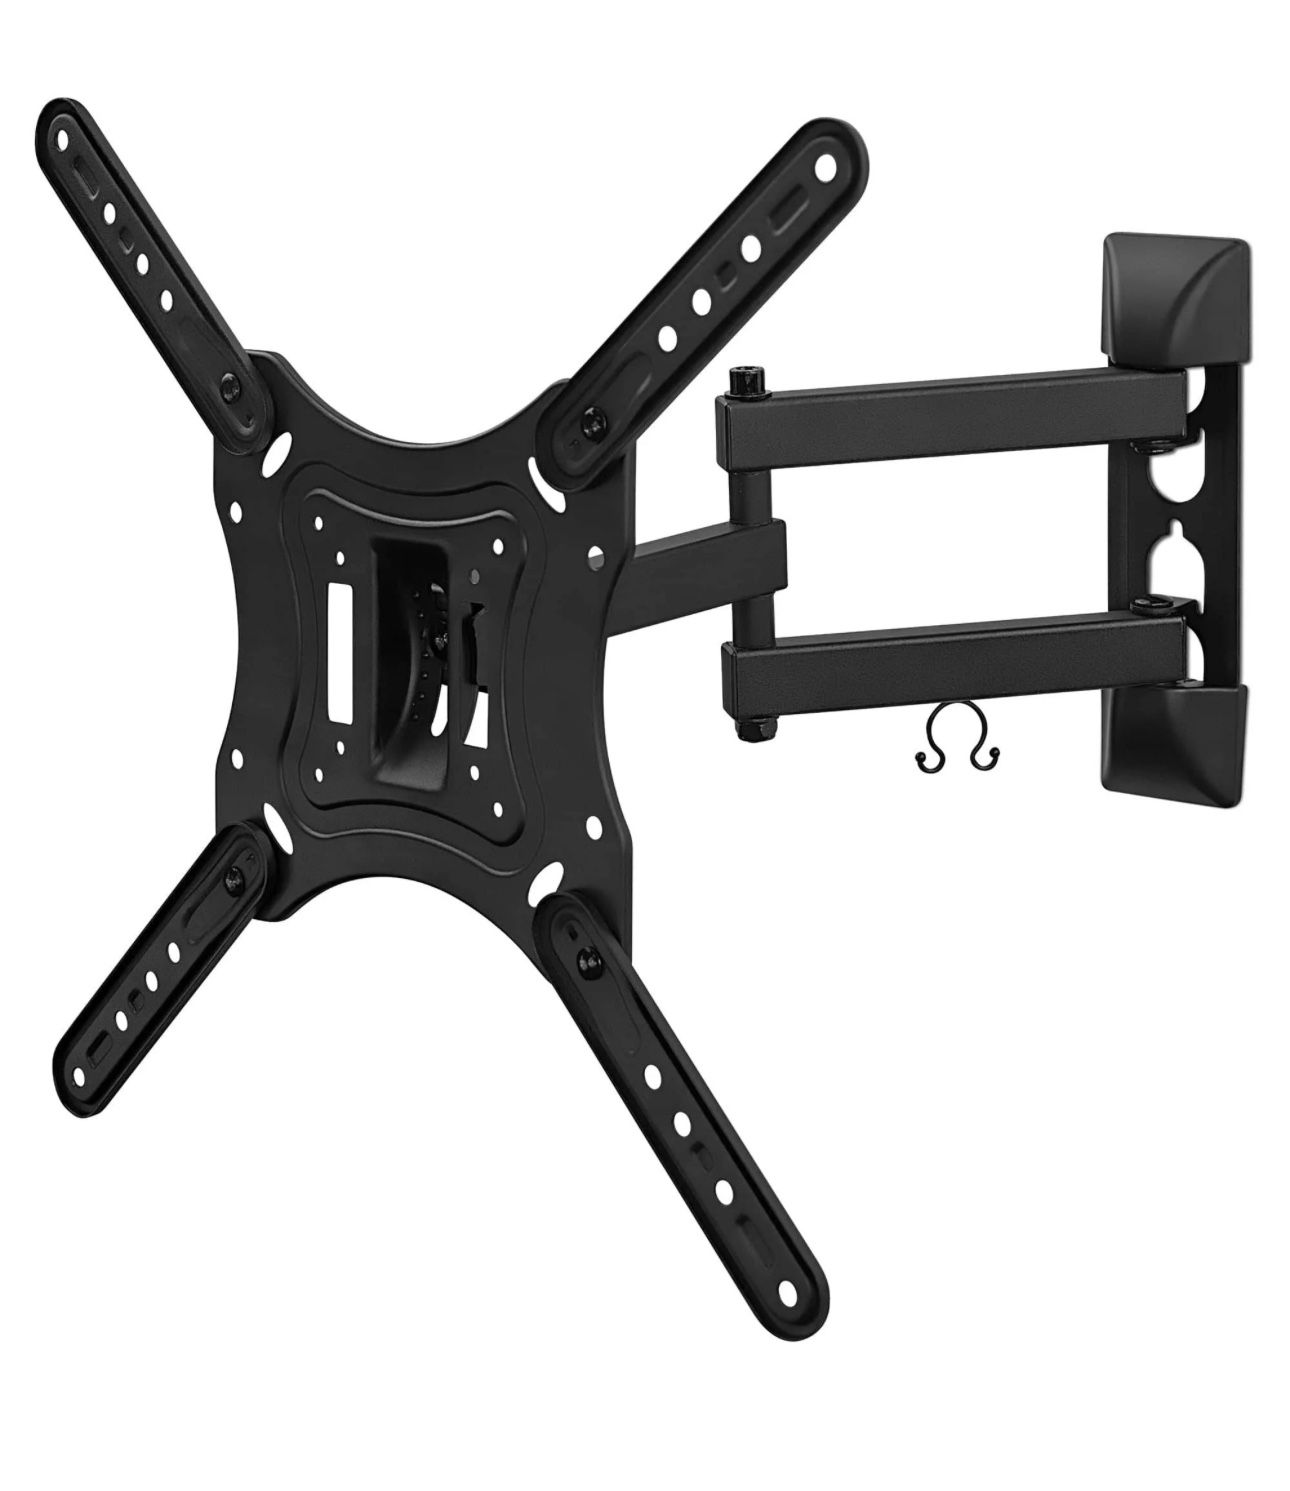 New Wall Mount 23-55